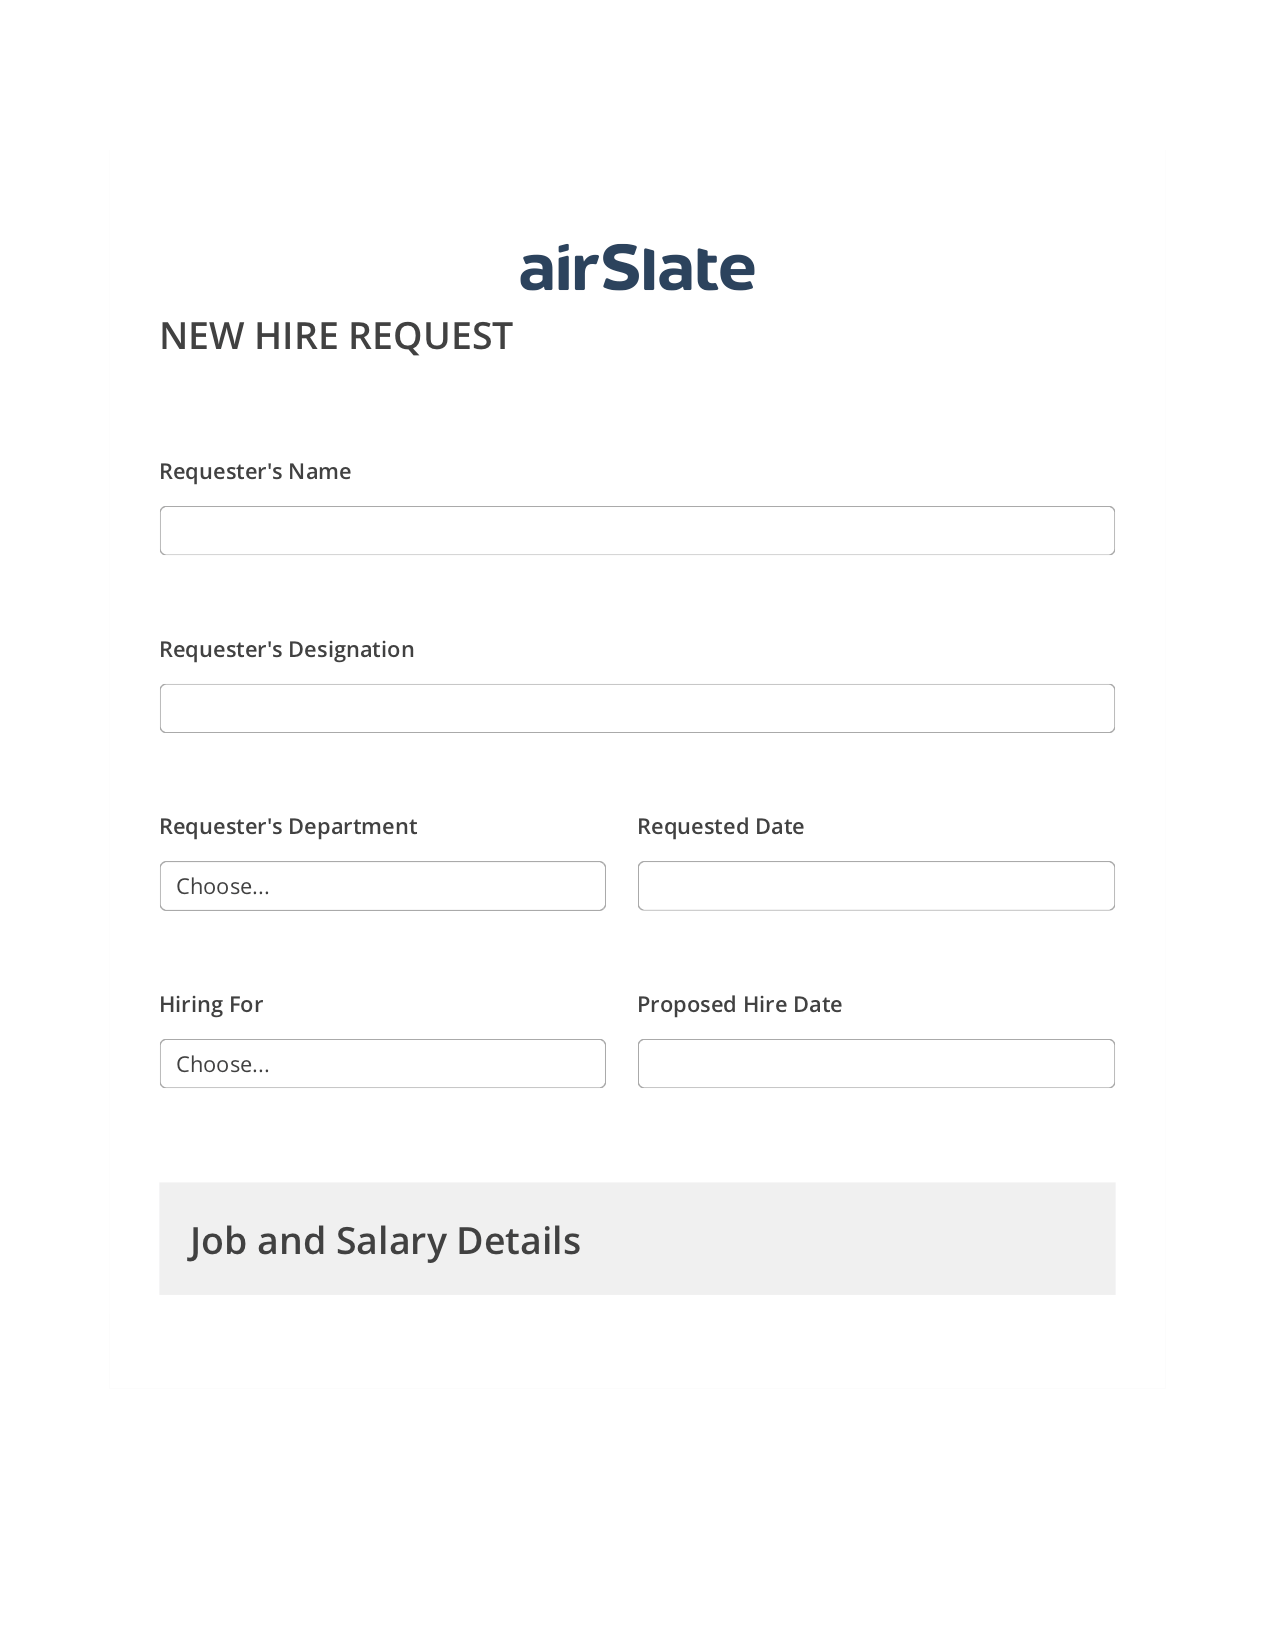 Hiring Request Workflow Pre-fill from MS Dynamics 365 Records, Unassign Role Bot, Archive to SharePoint Folder Bot